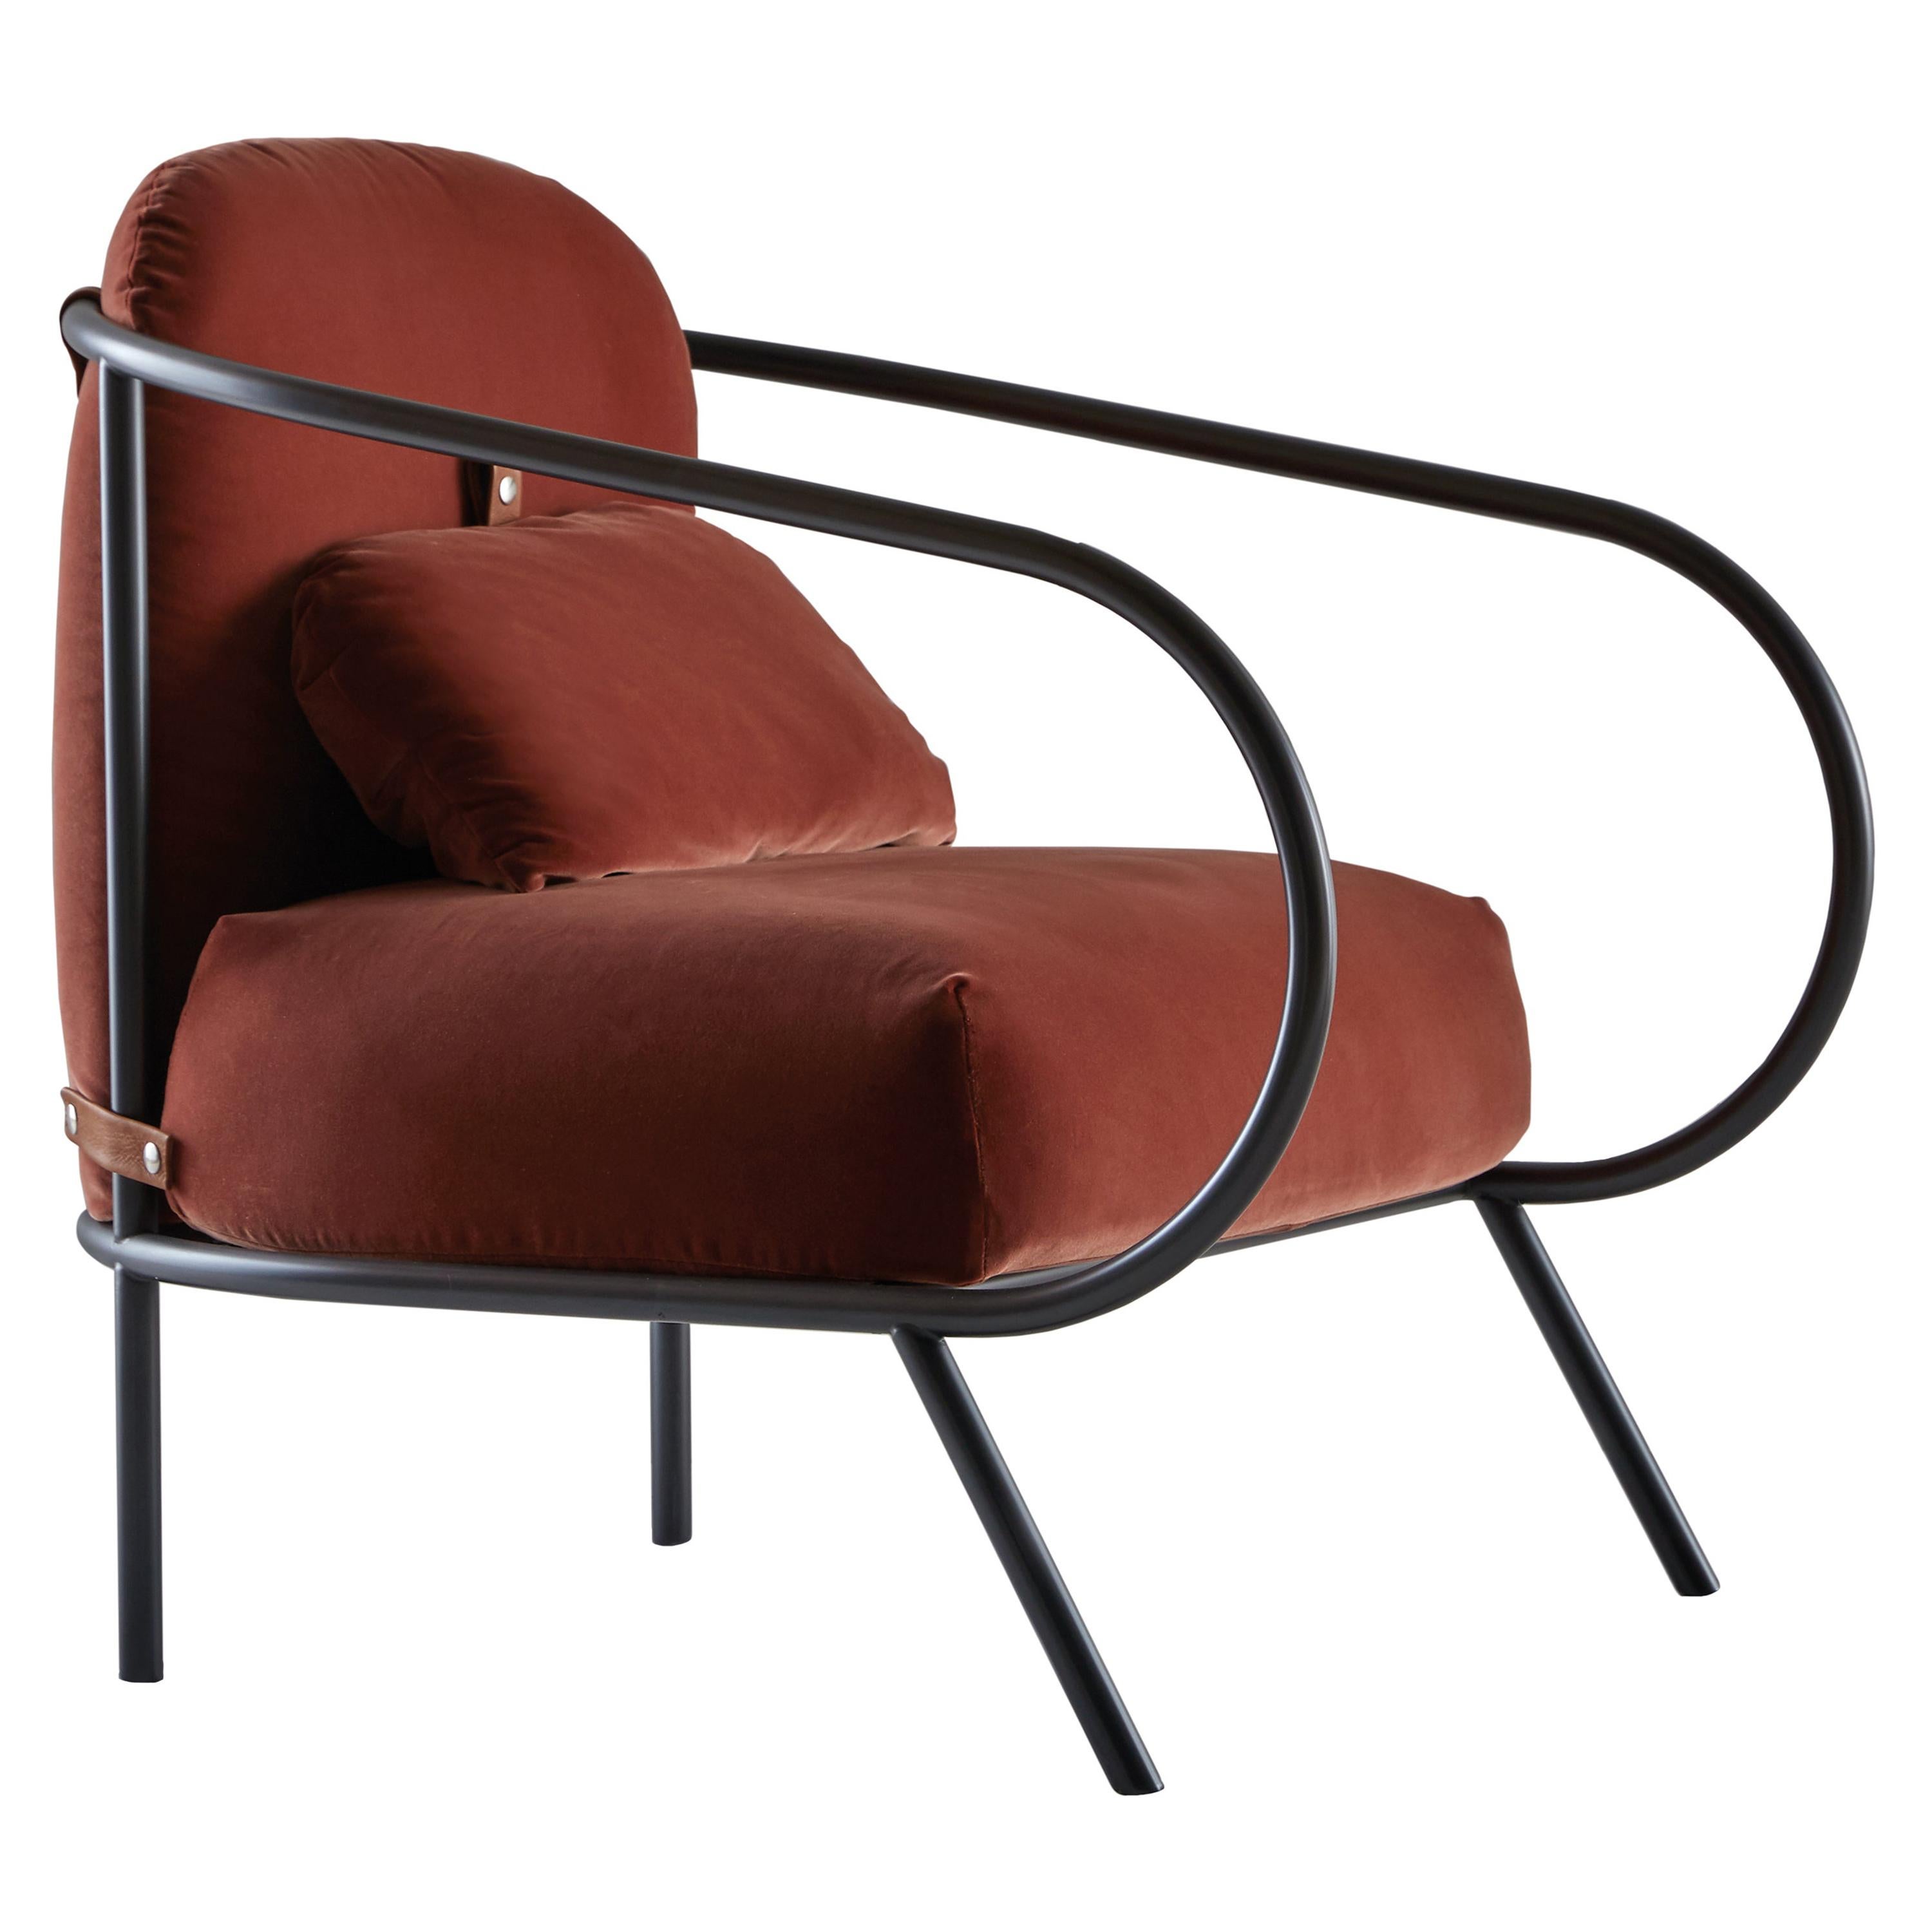 Minima Armchair in Red by Denis Guidone for Mingardo